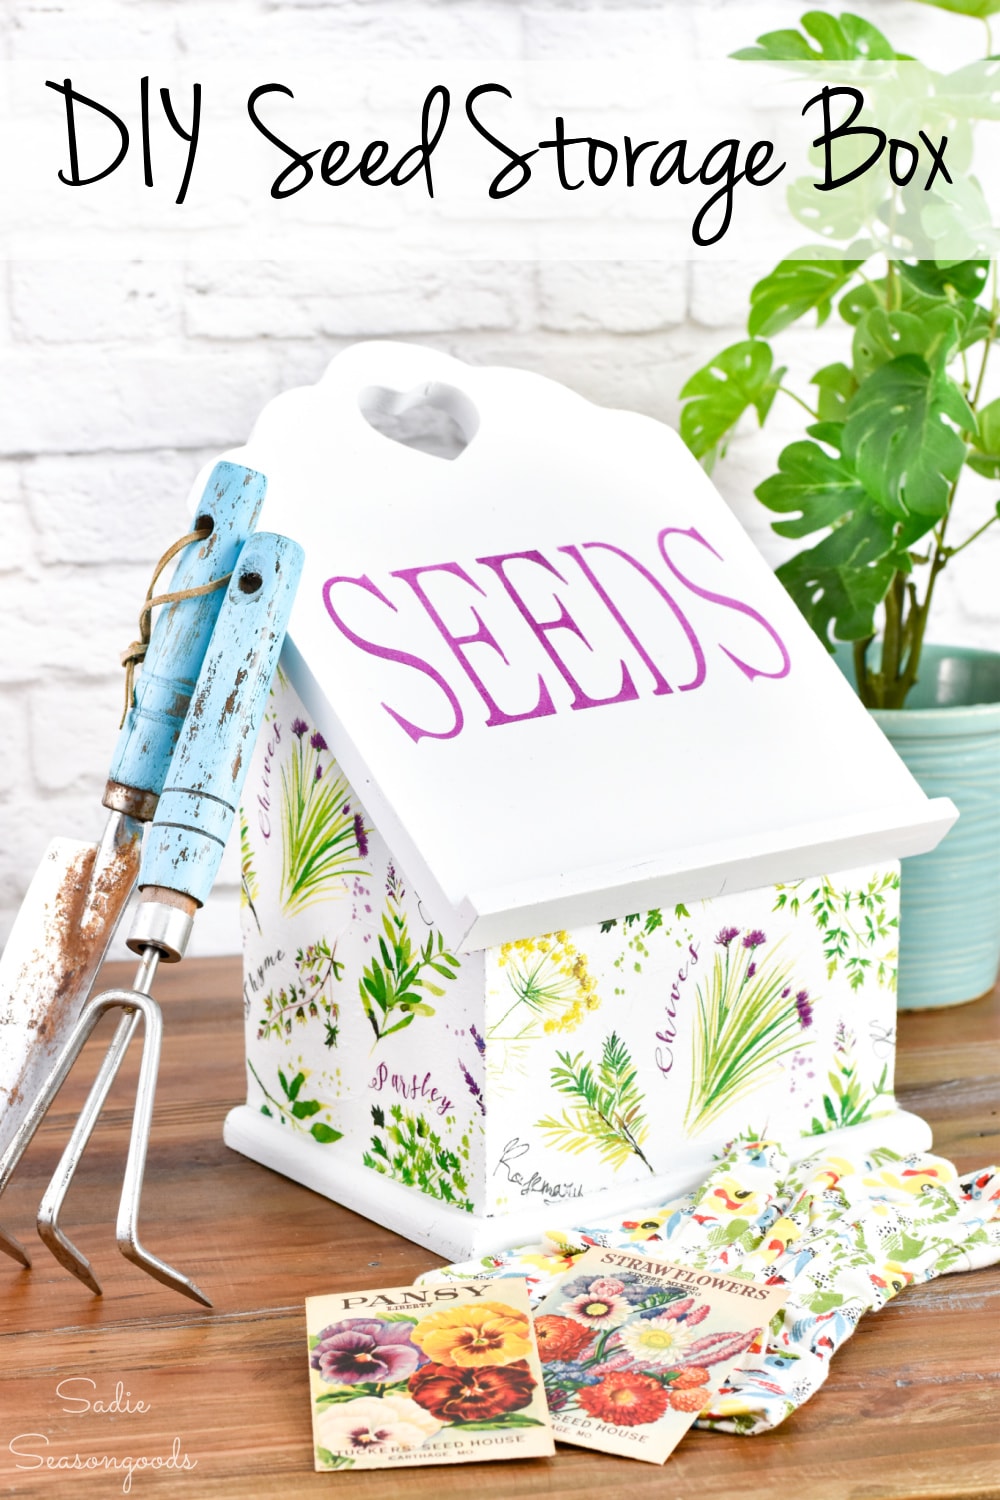 Seed Storage Box from a Wooden Salt Box